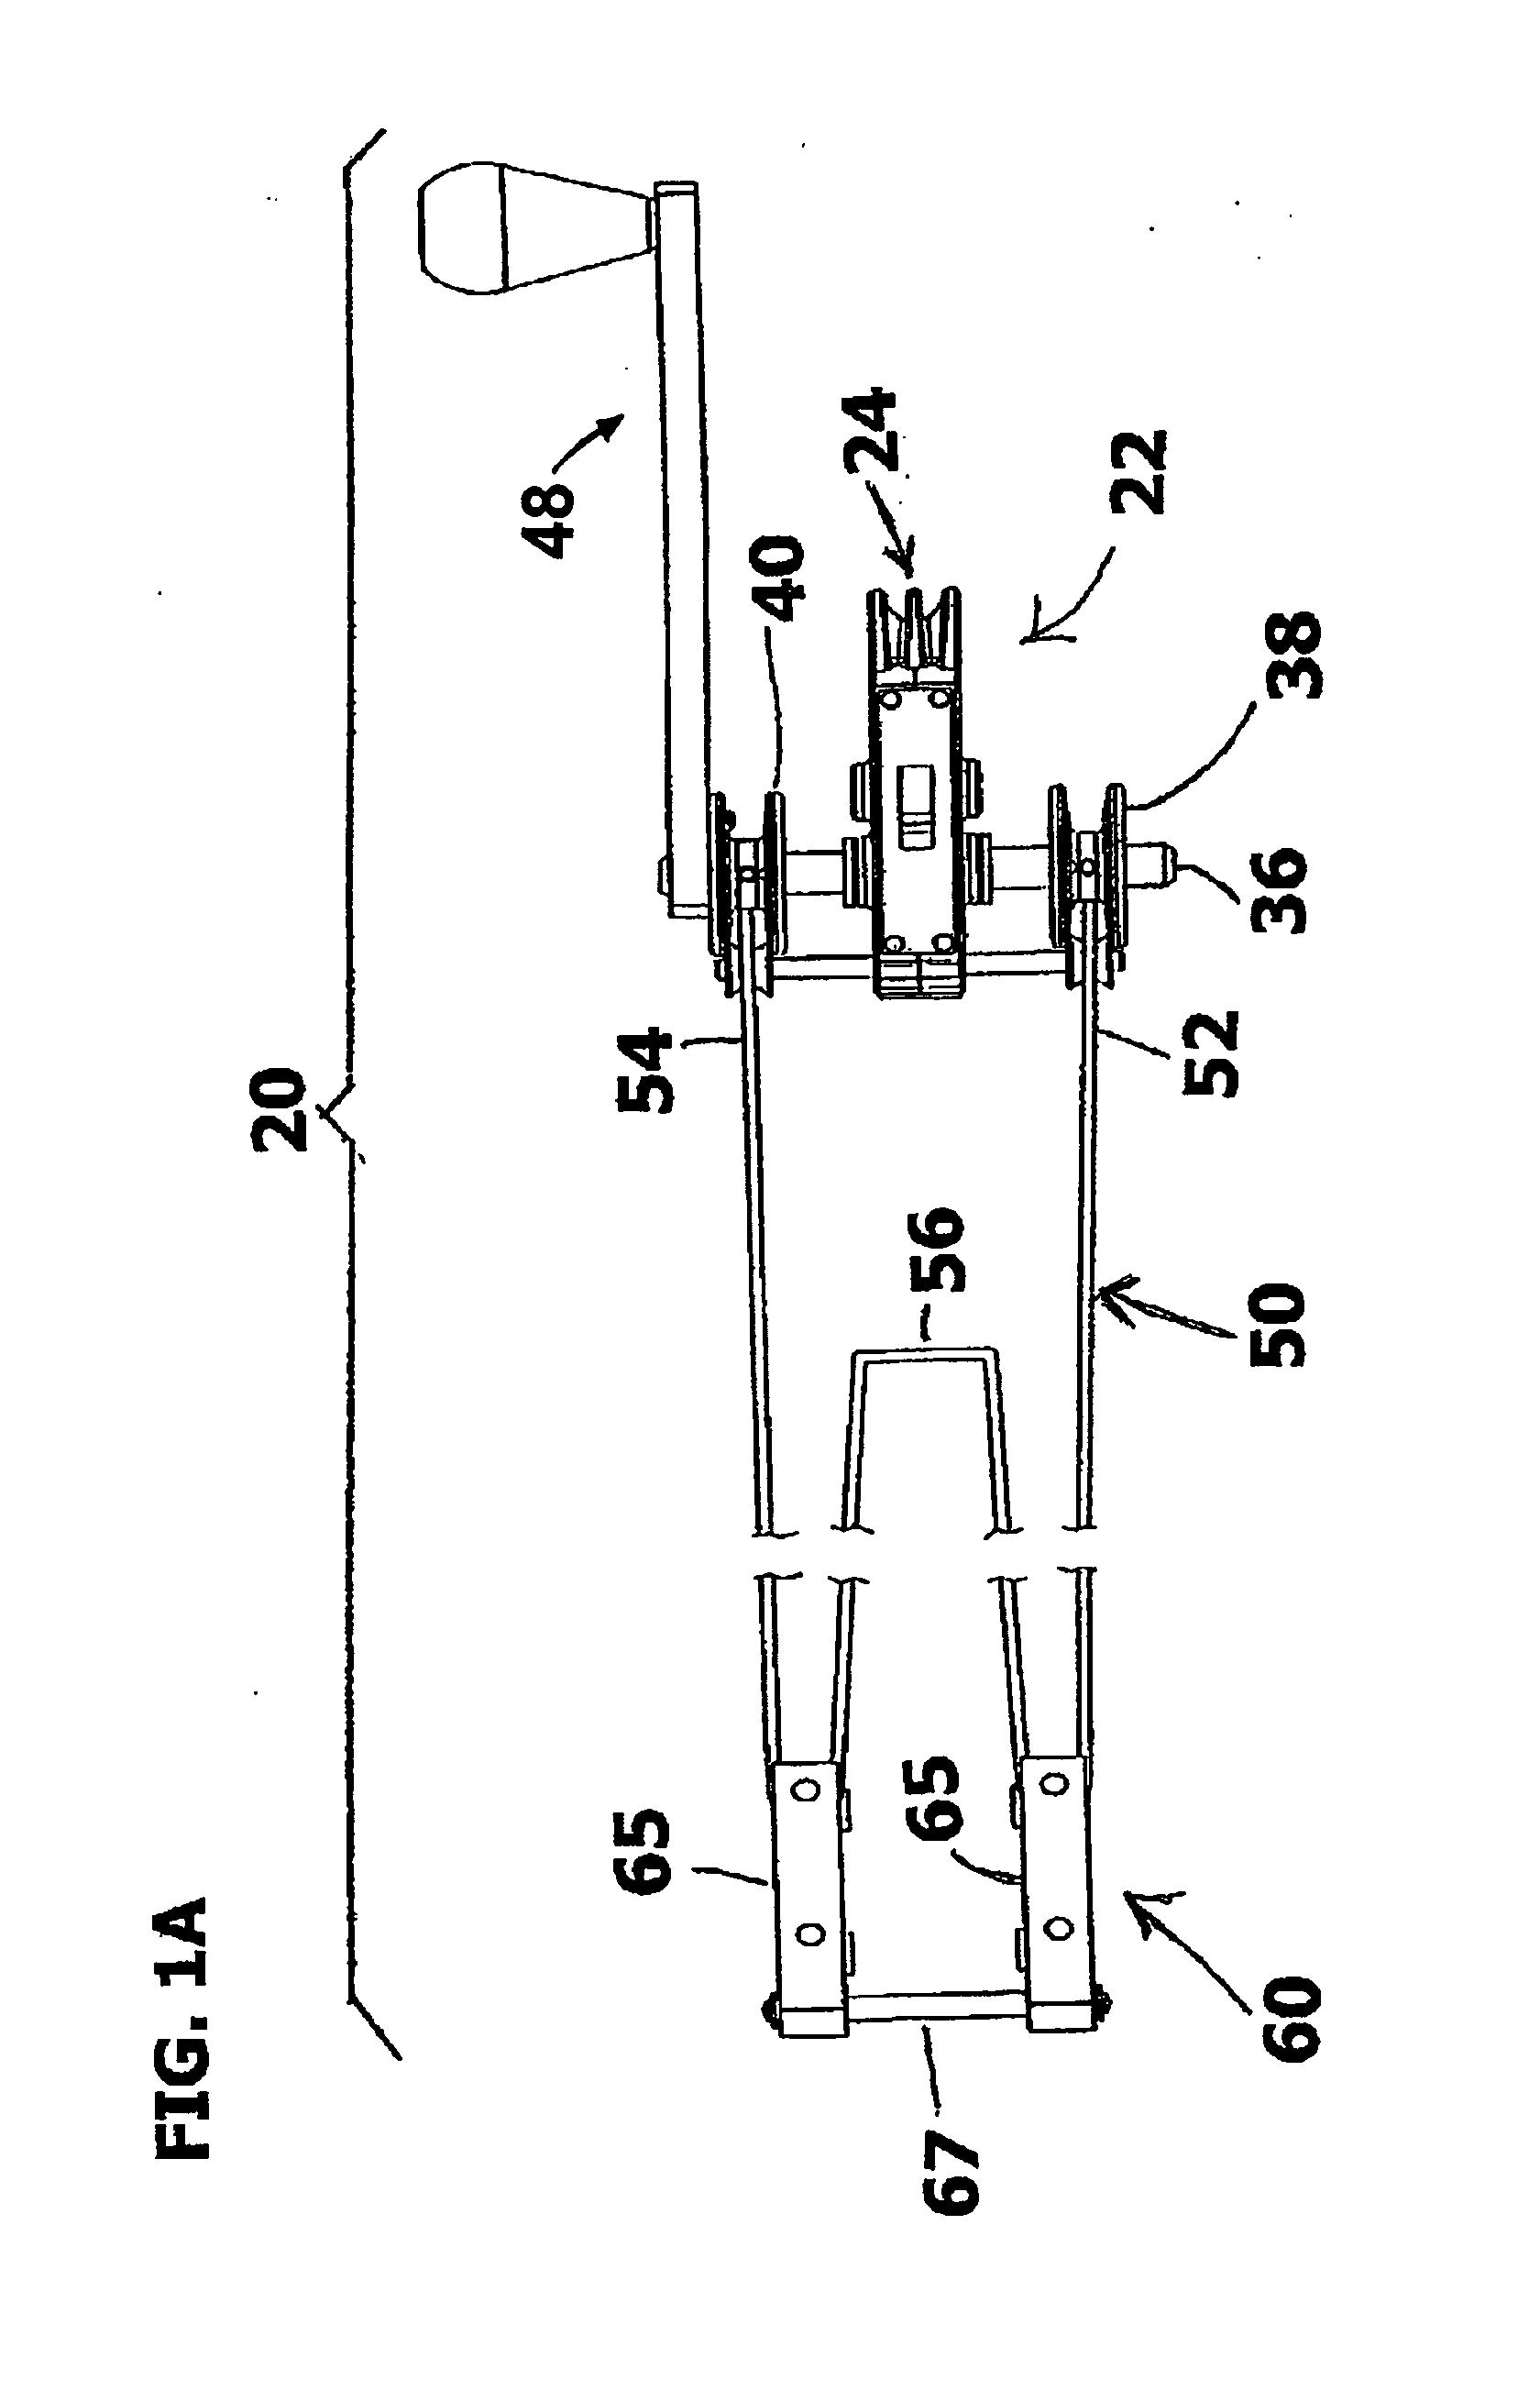 Cocking Winch Apparatus For A Crossbow, Crossbow System Including The Cocking Winch Apparatus, And Method Of Using Same